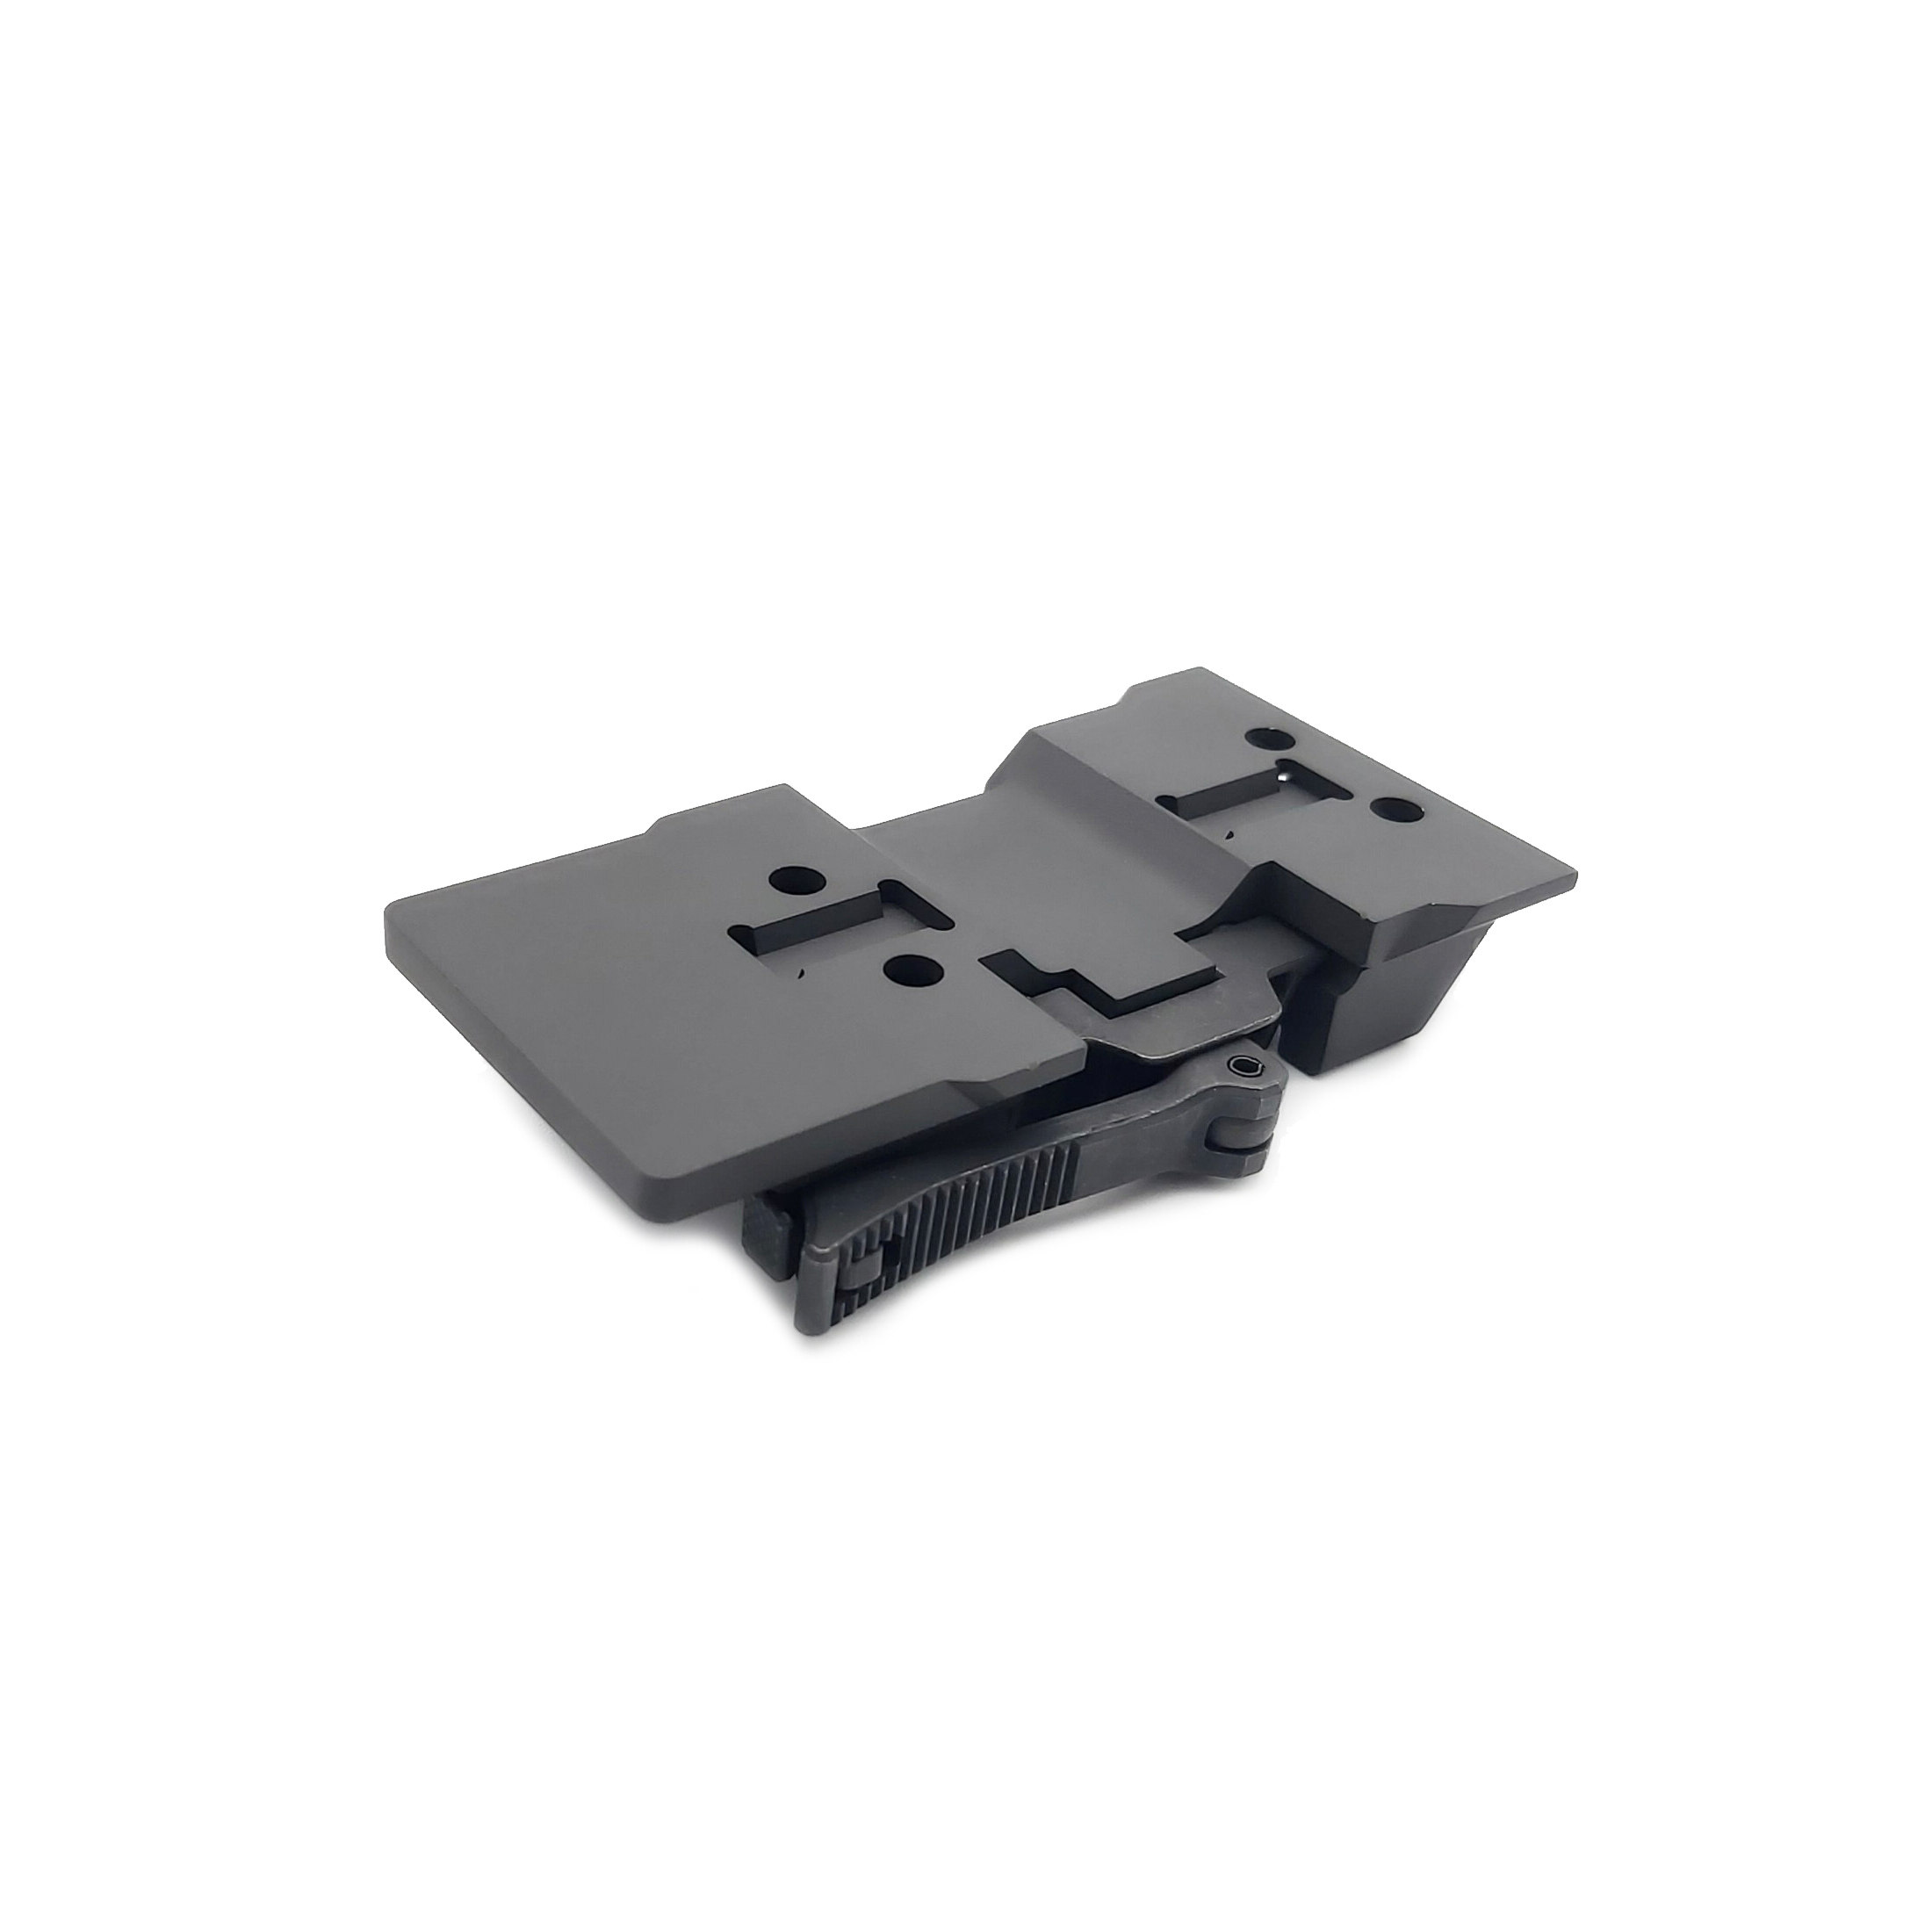 Holosun QD Mount 510C, quick release for HS510C, accessory for Holosun red dot sights